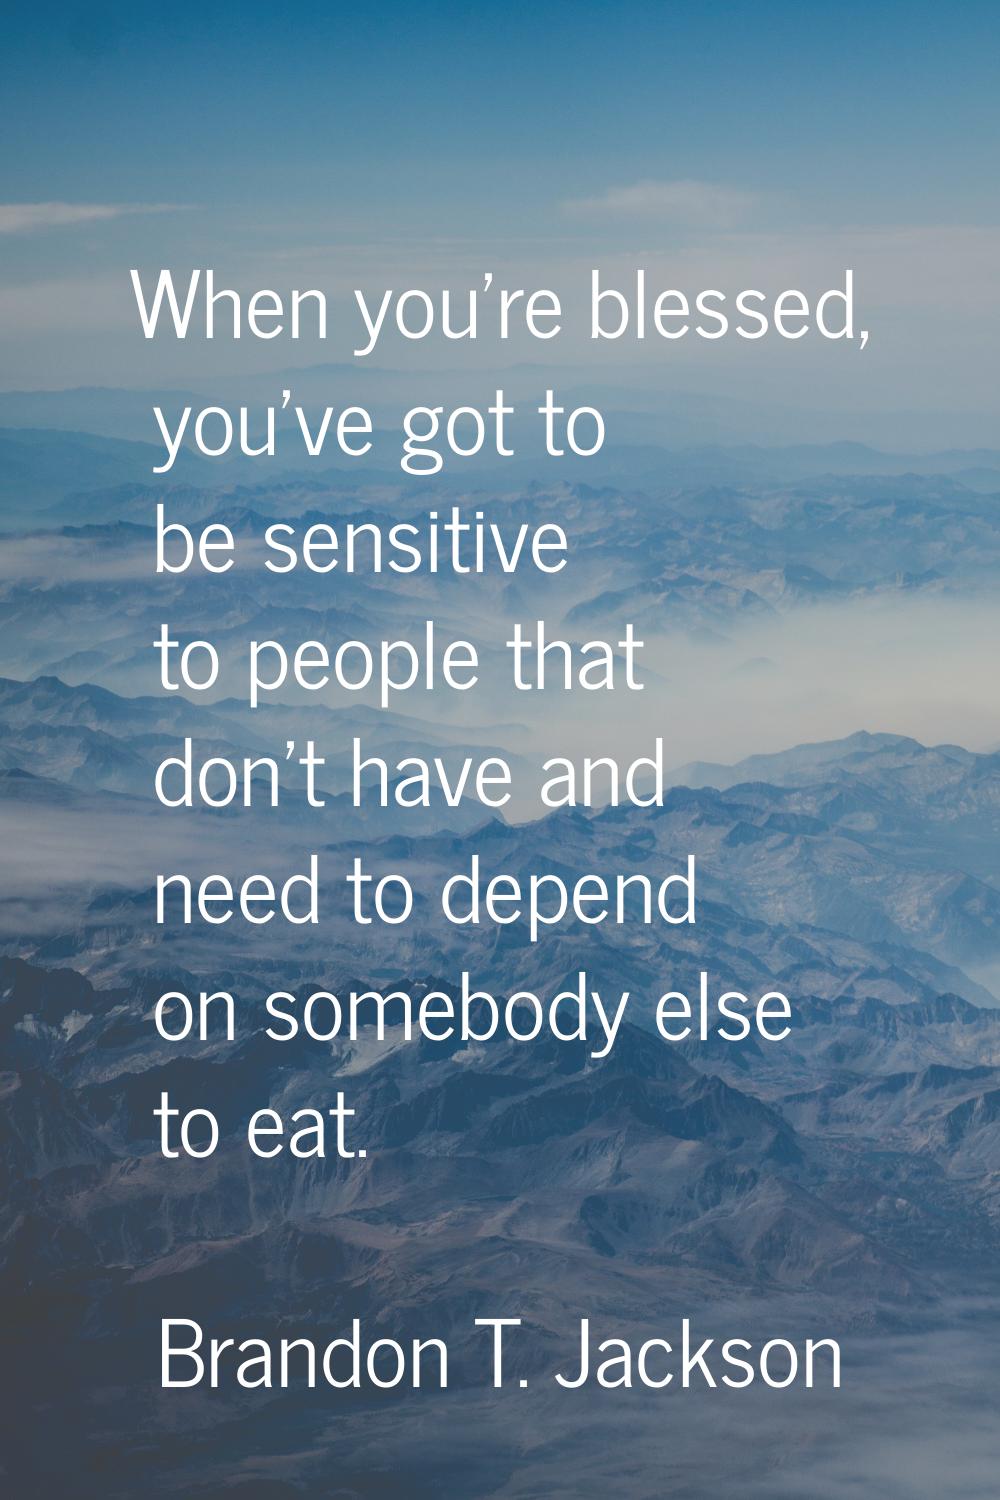 When you're blessed, you've got to be sensitive to people that don't have and need to depend on som